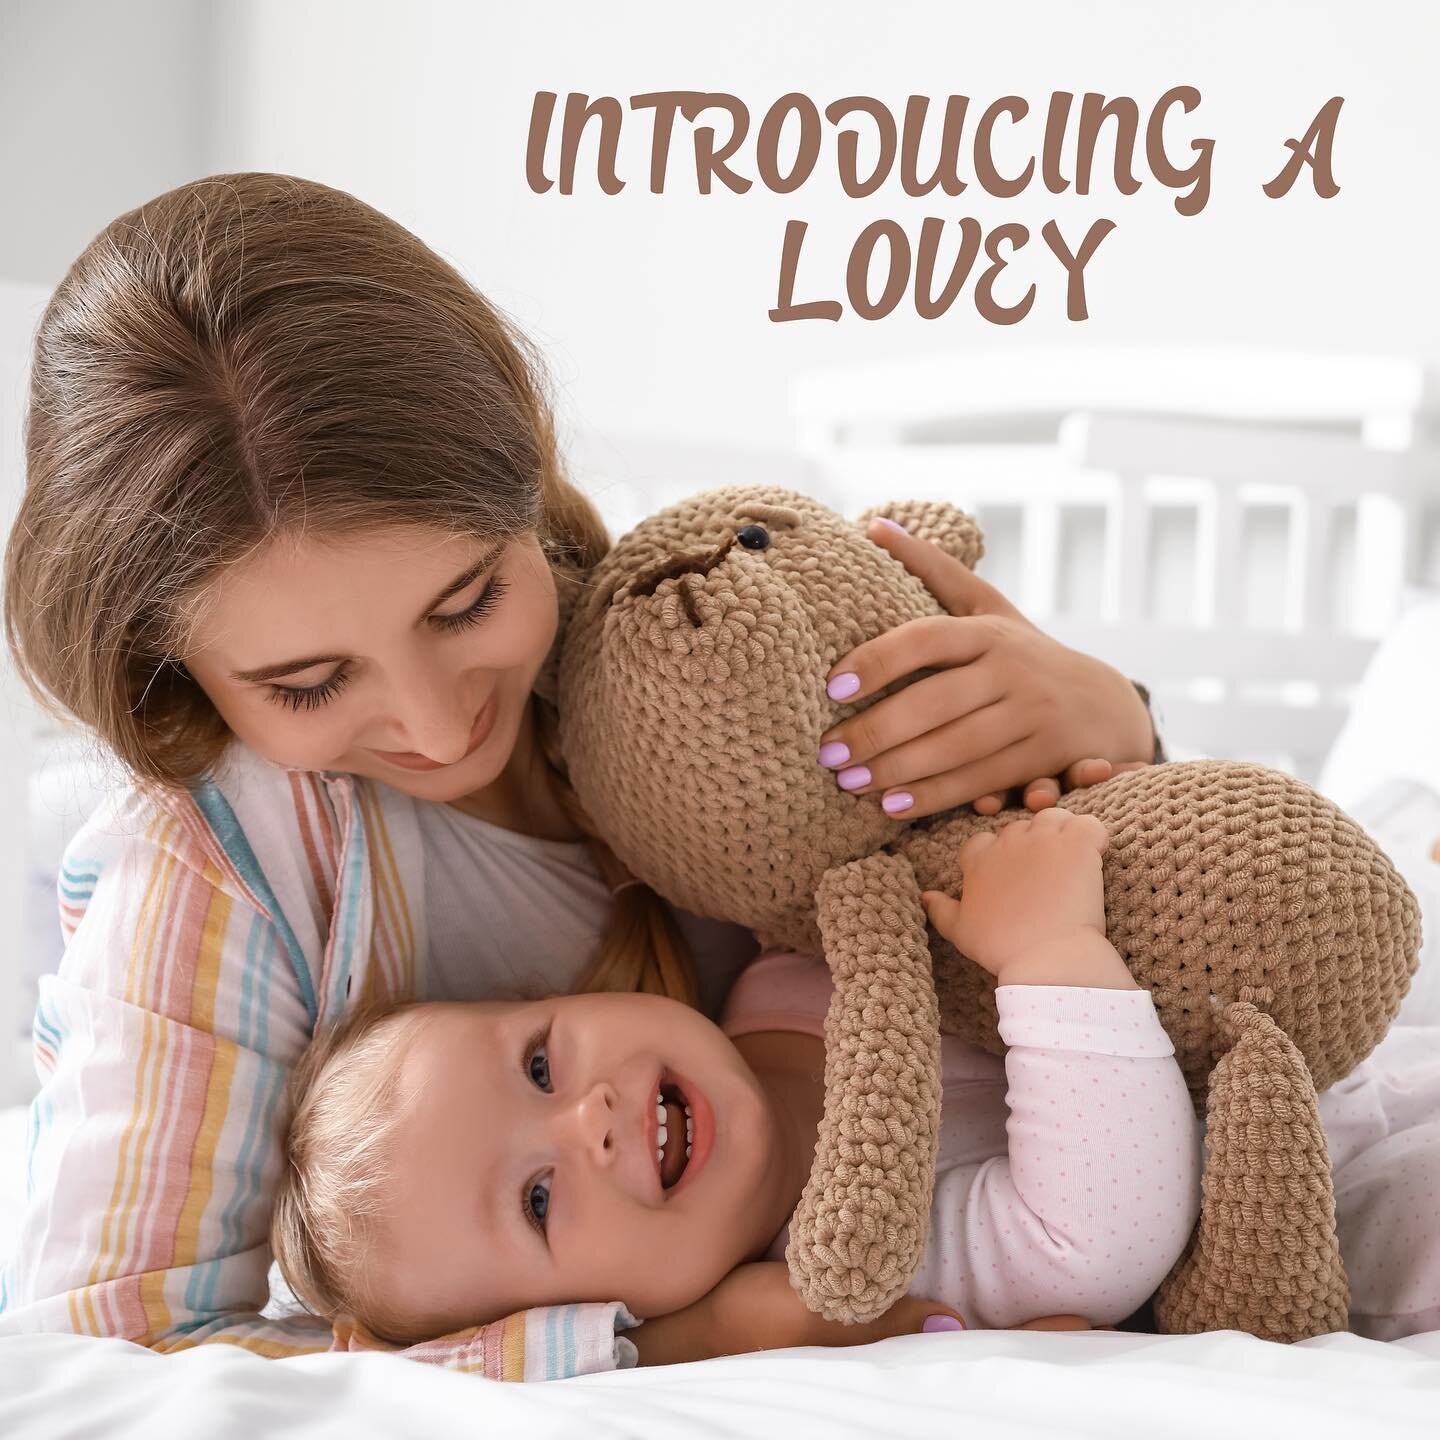 Choosing and Using a &ldquo;Lovey&rdquo; - FAQ 🧸⠀
⠀
🐨 What is a lovey and what does it do? A lovey is a transitional object. It can provide comfort, security and consistency for your child. It&rsquo;s especially helpful for sleep because it&rsquo;s